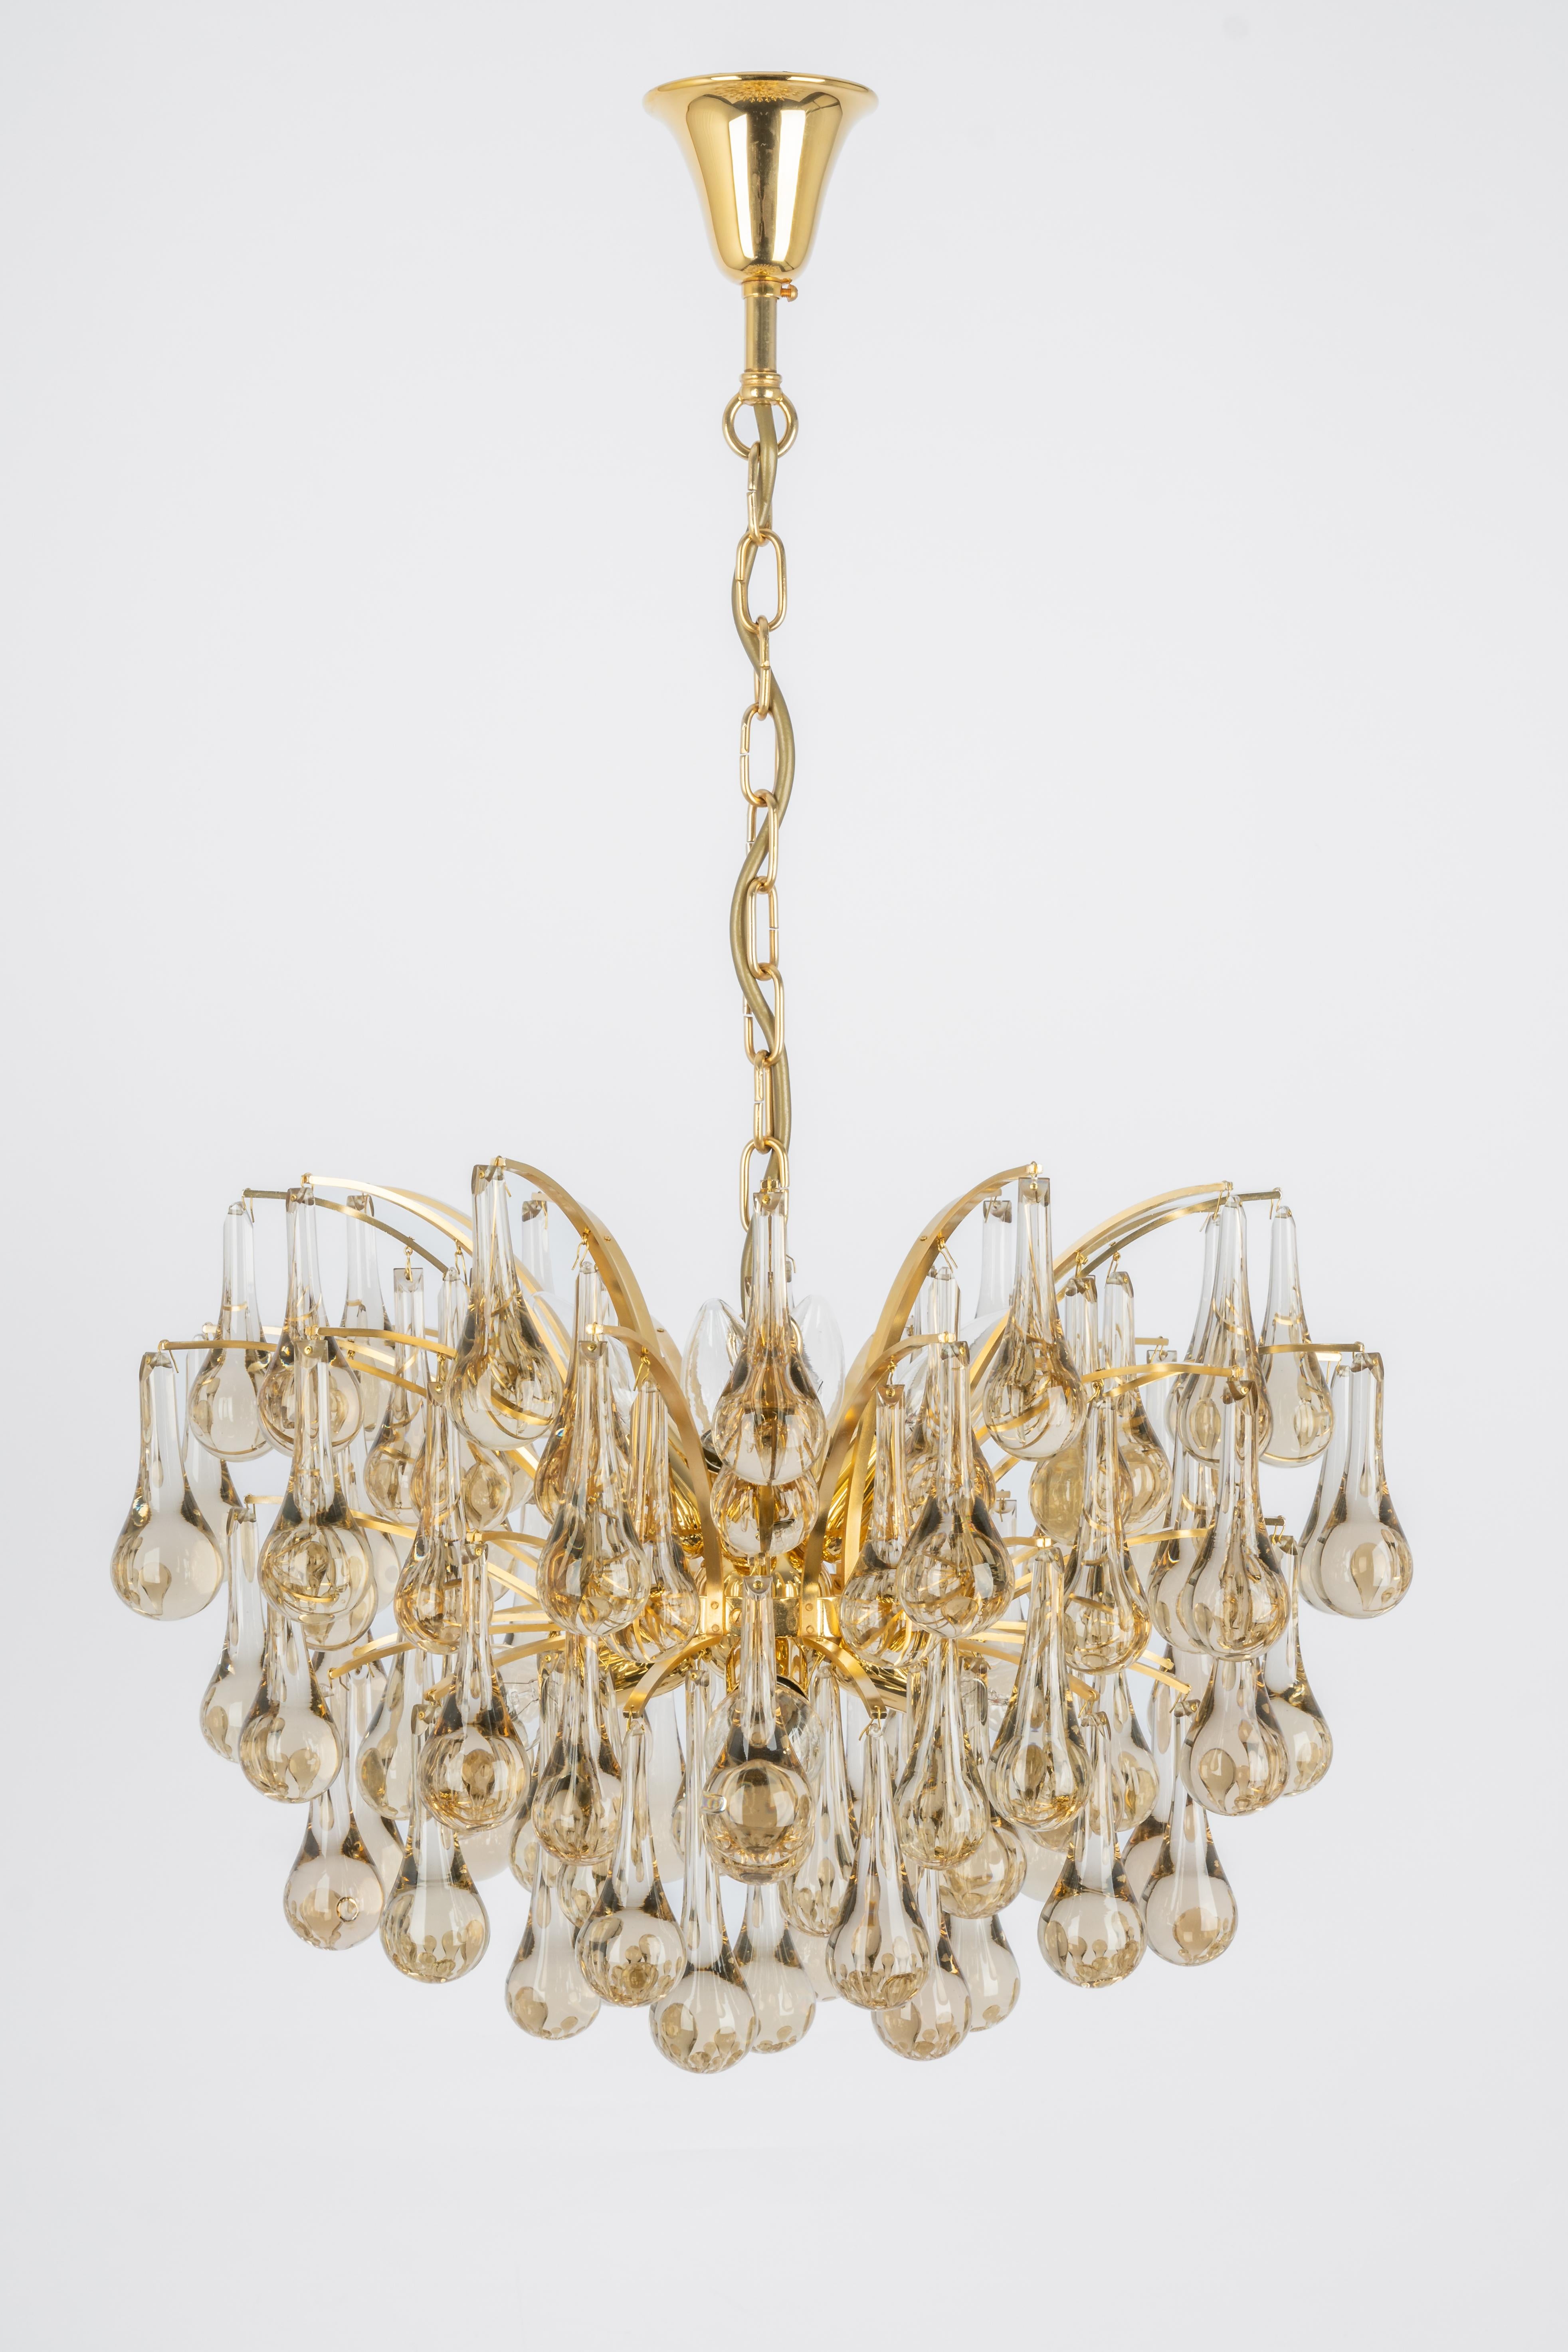 Large Murano Glass Tear Drop Chandelier, Christoph Palme, Germany, 1970s For Sale 8